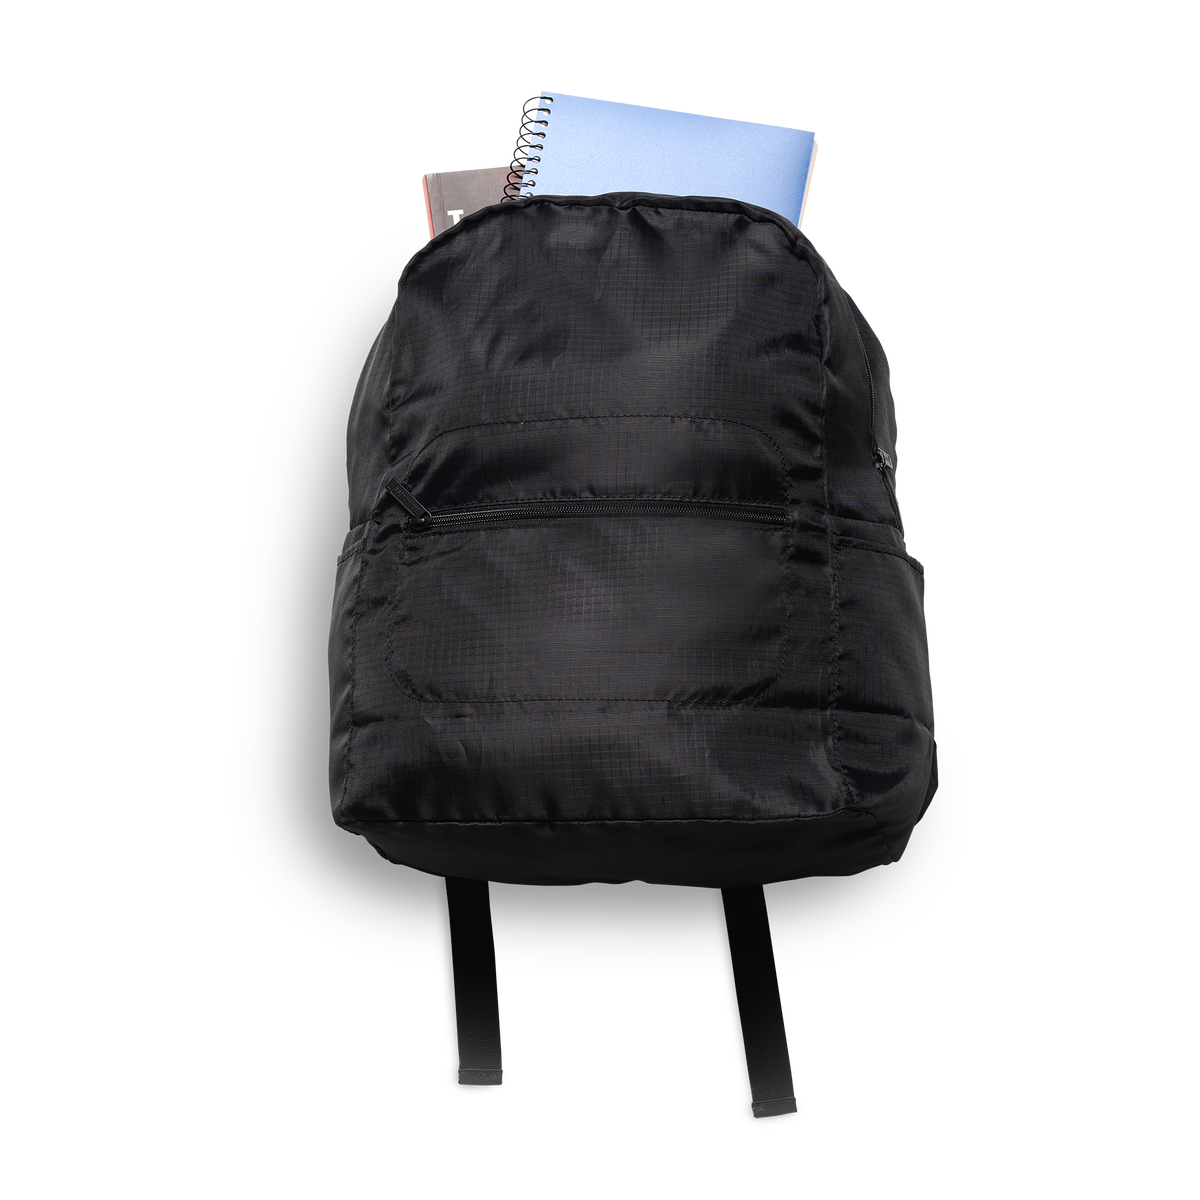 Photo showing the backpack with school supplies poling out the top.